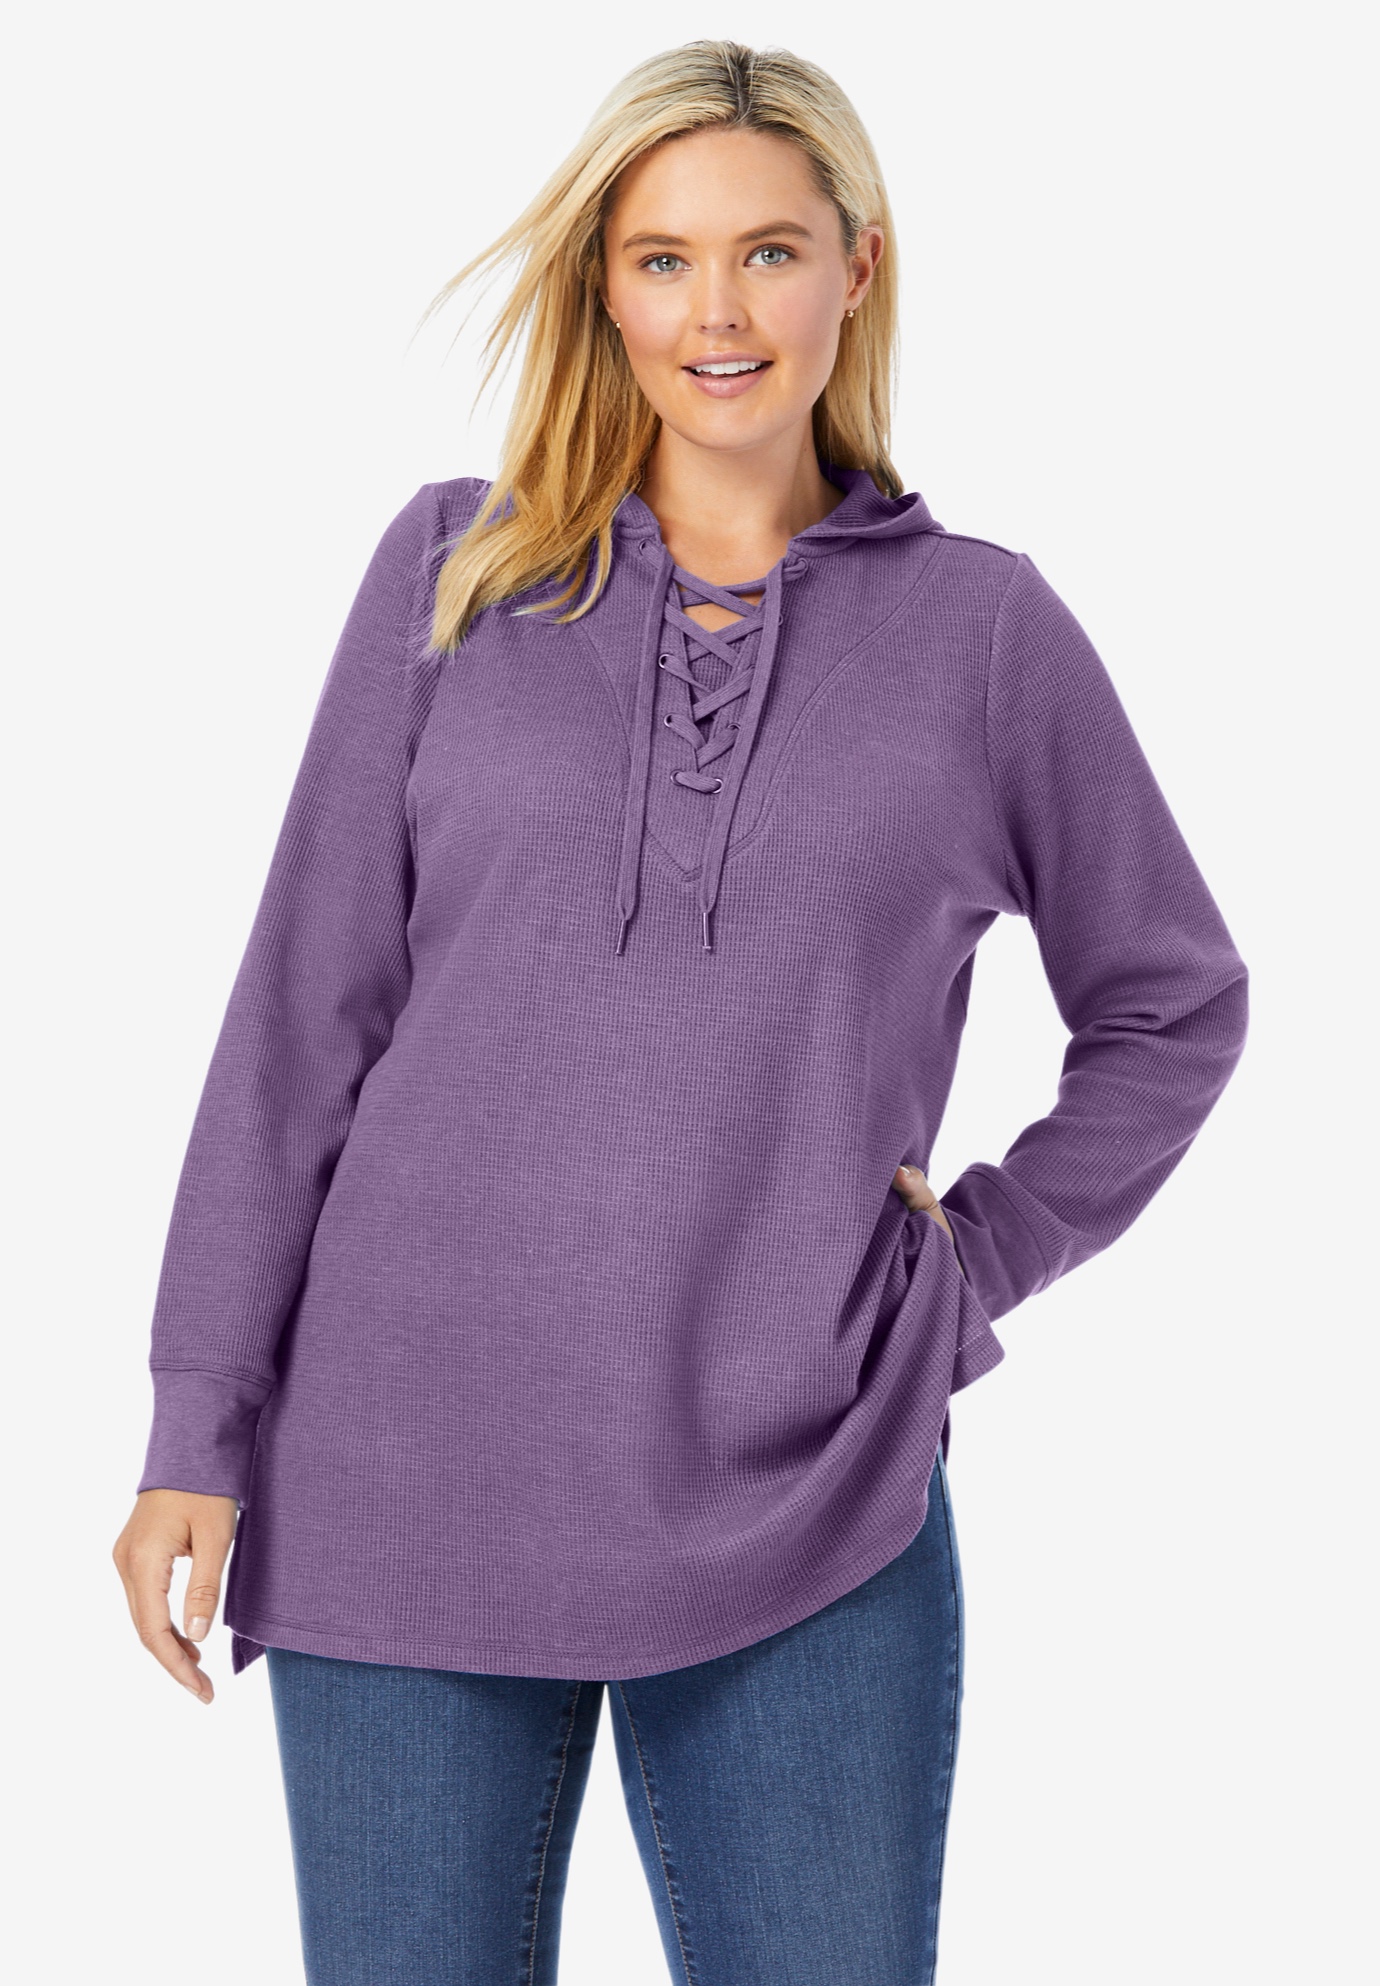 Washed Thermal Lace-Up Hooded Sweatshirt | Fullbeauty Outlet